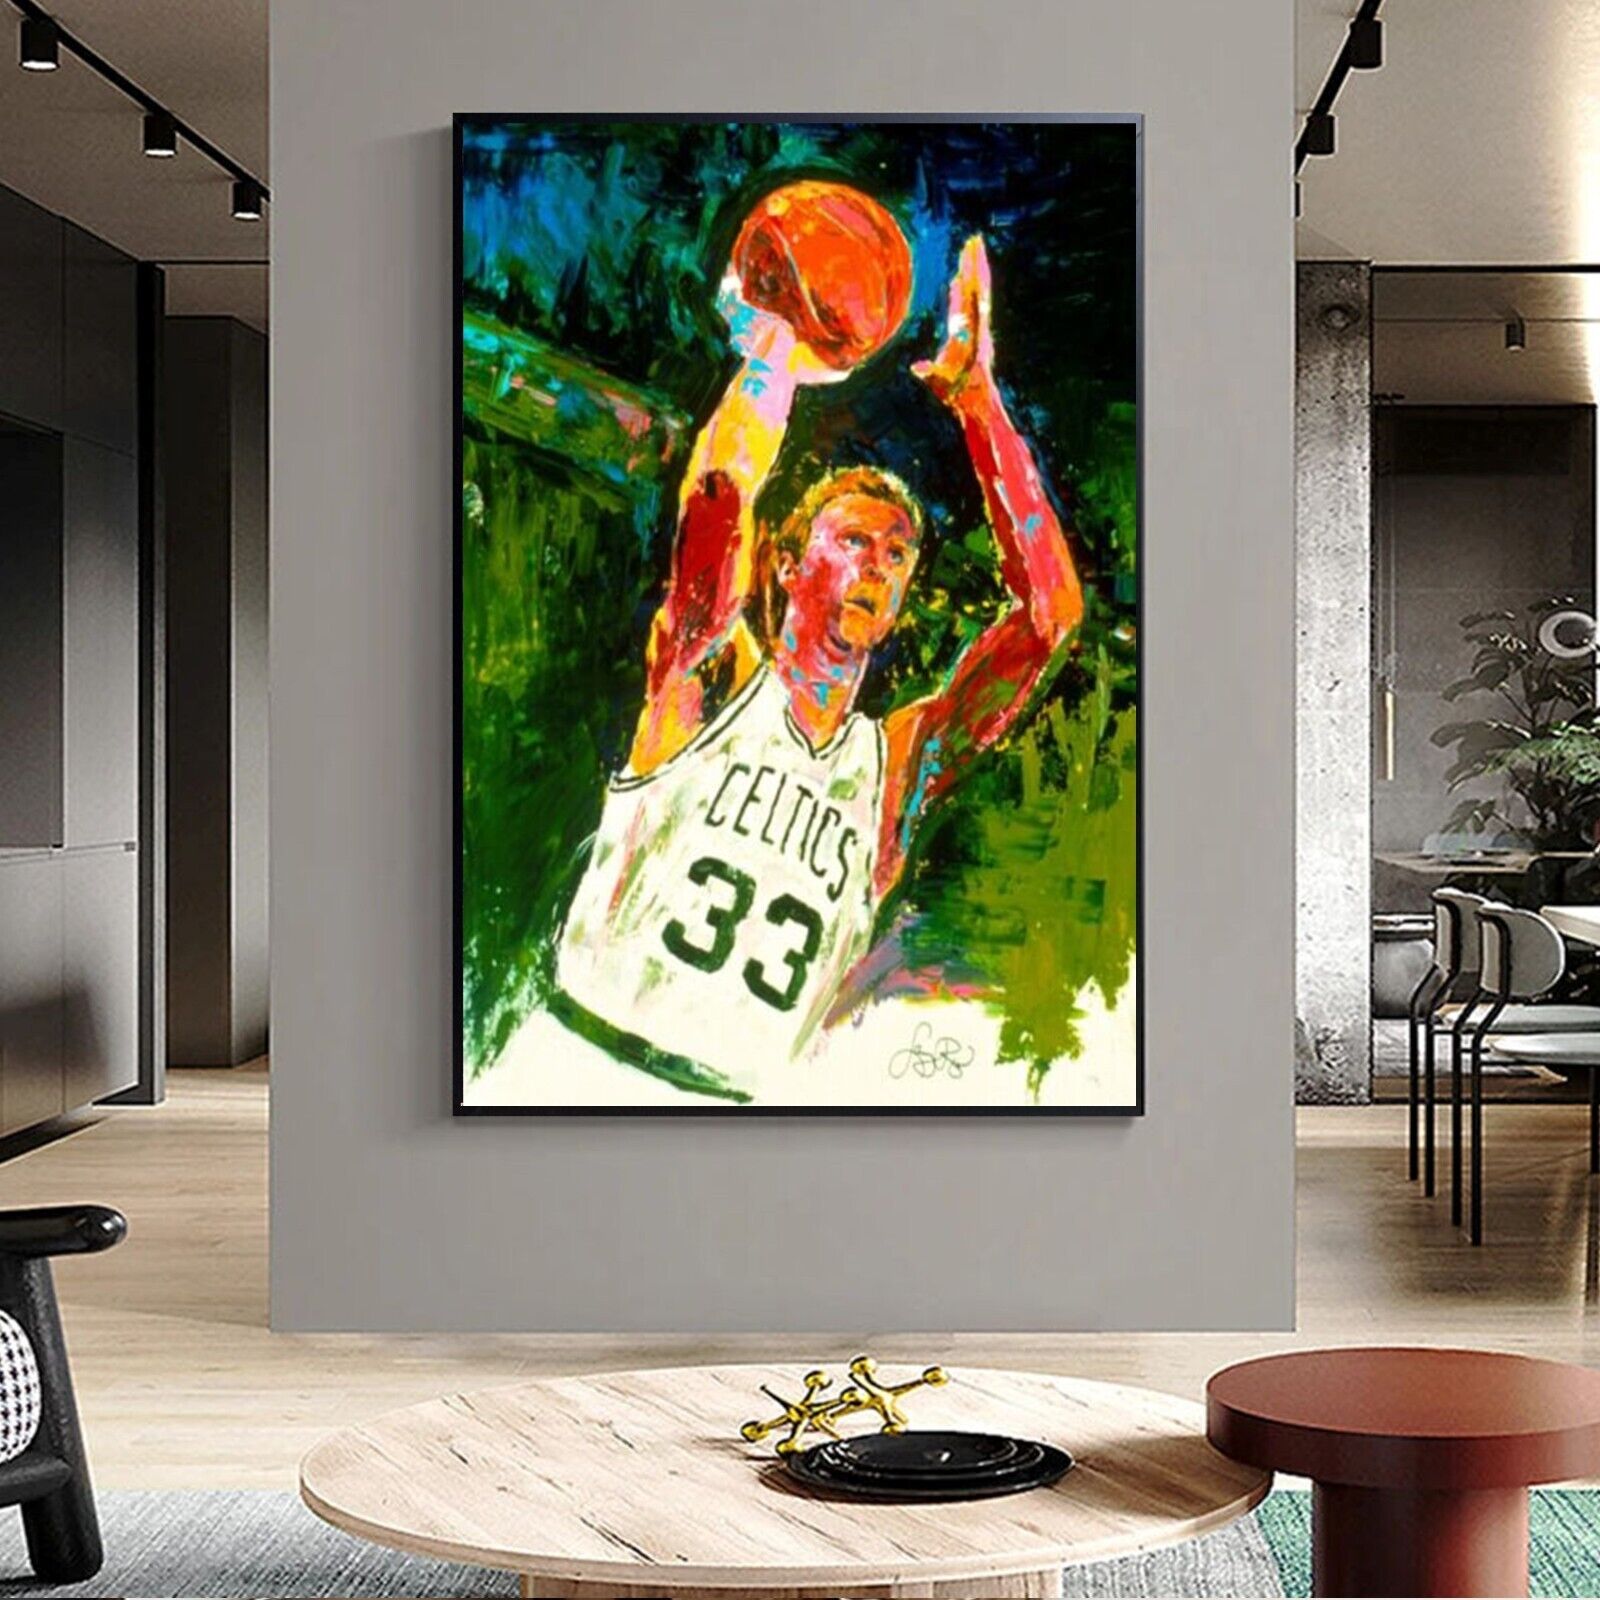 Sale Signed By Larry Bird Handmade Acrylic Painting 48H X 36 Was $7K Now $1,495